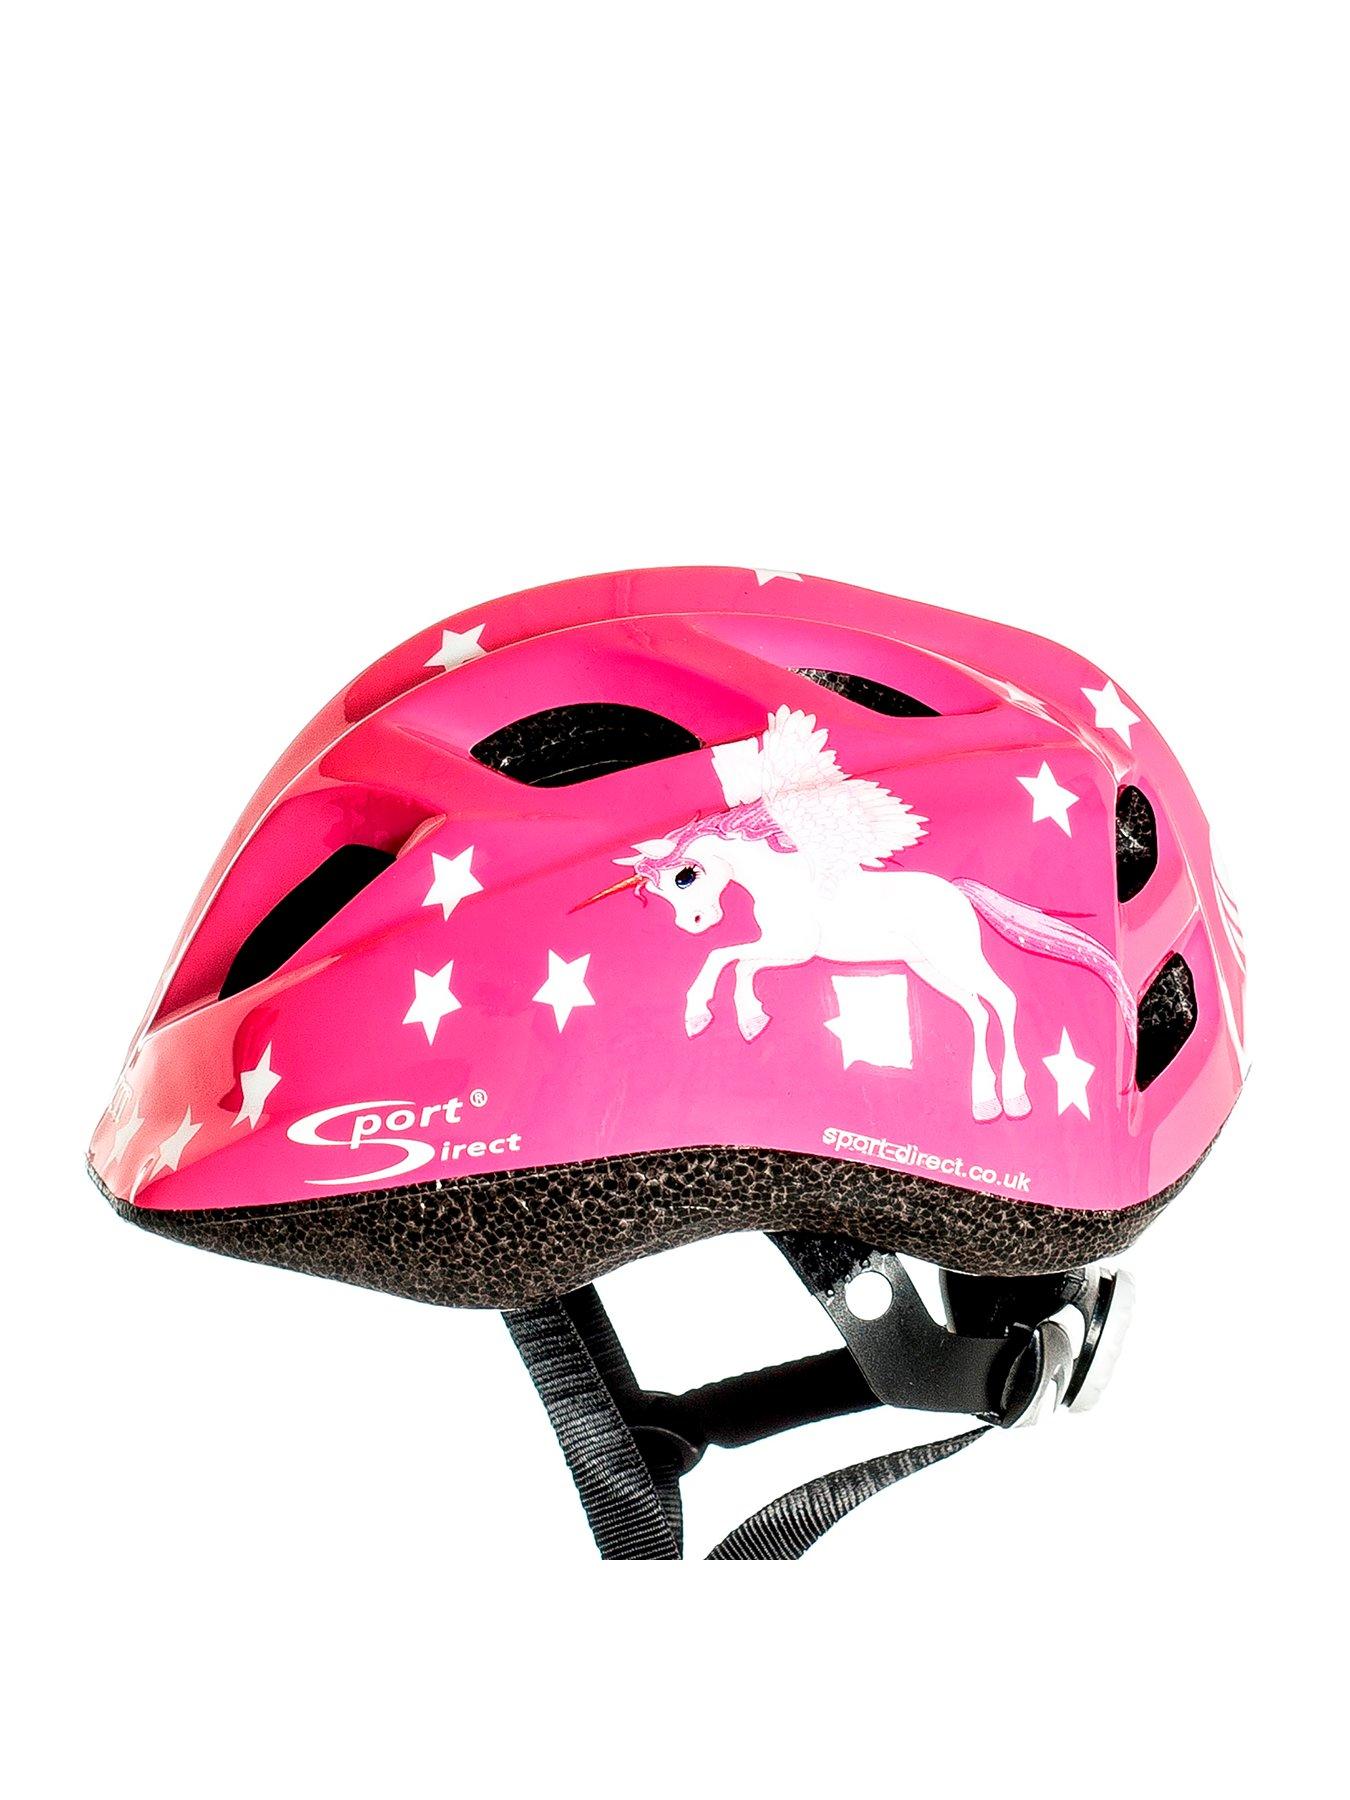 sports direct cycle helmet